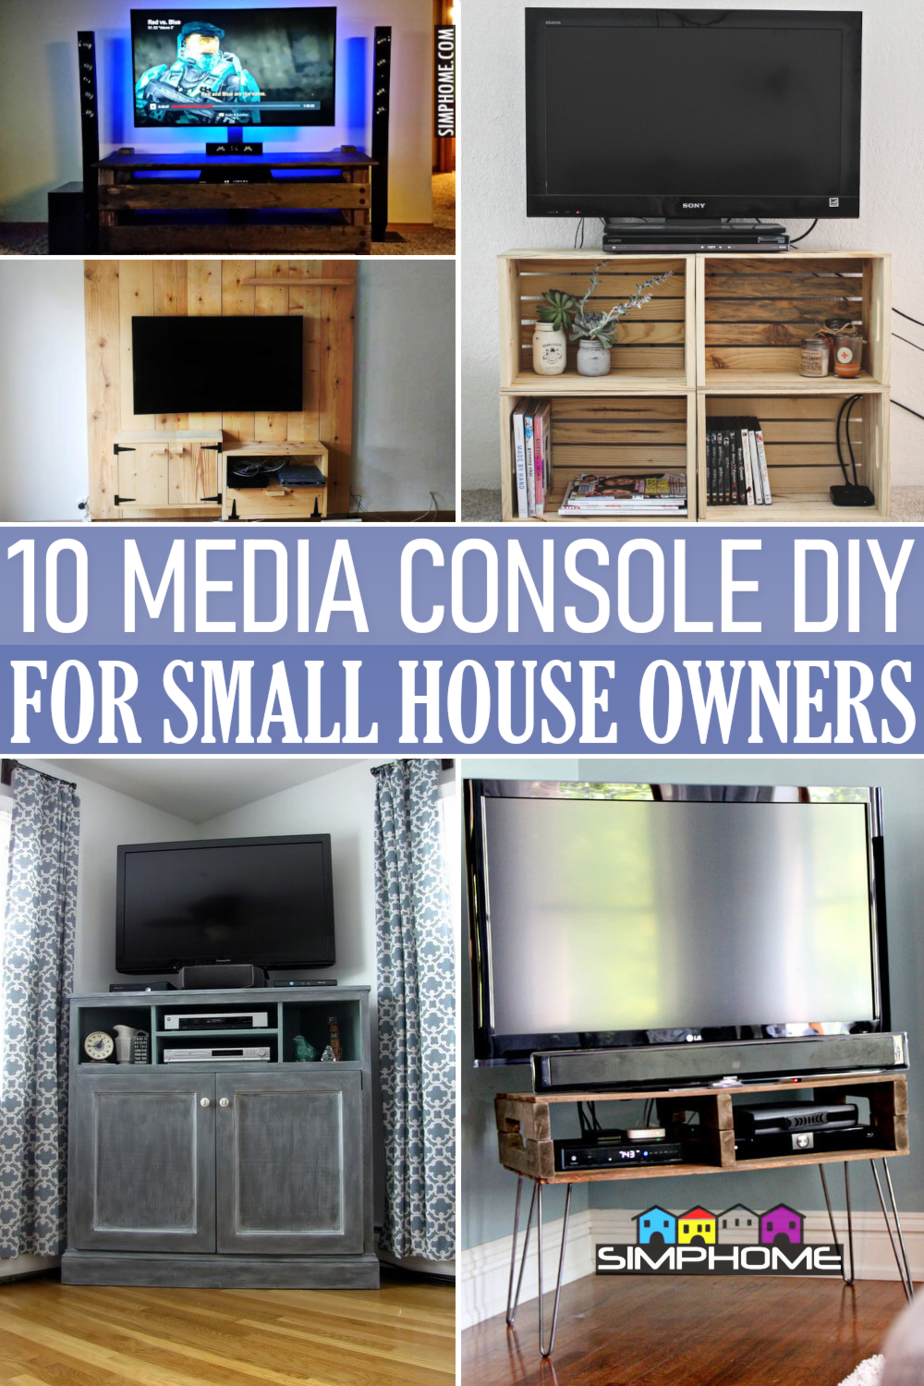 10 Media Console Ideas for Small Property Renters VIA Simphome.comFeatured